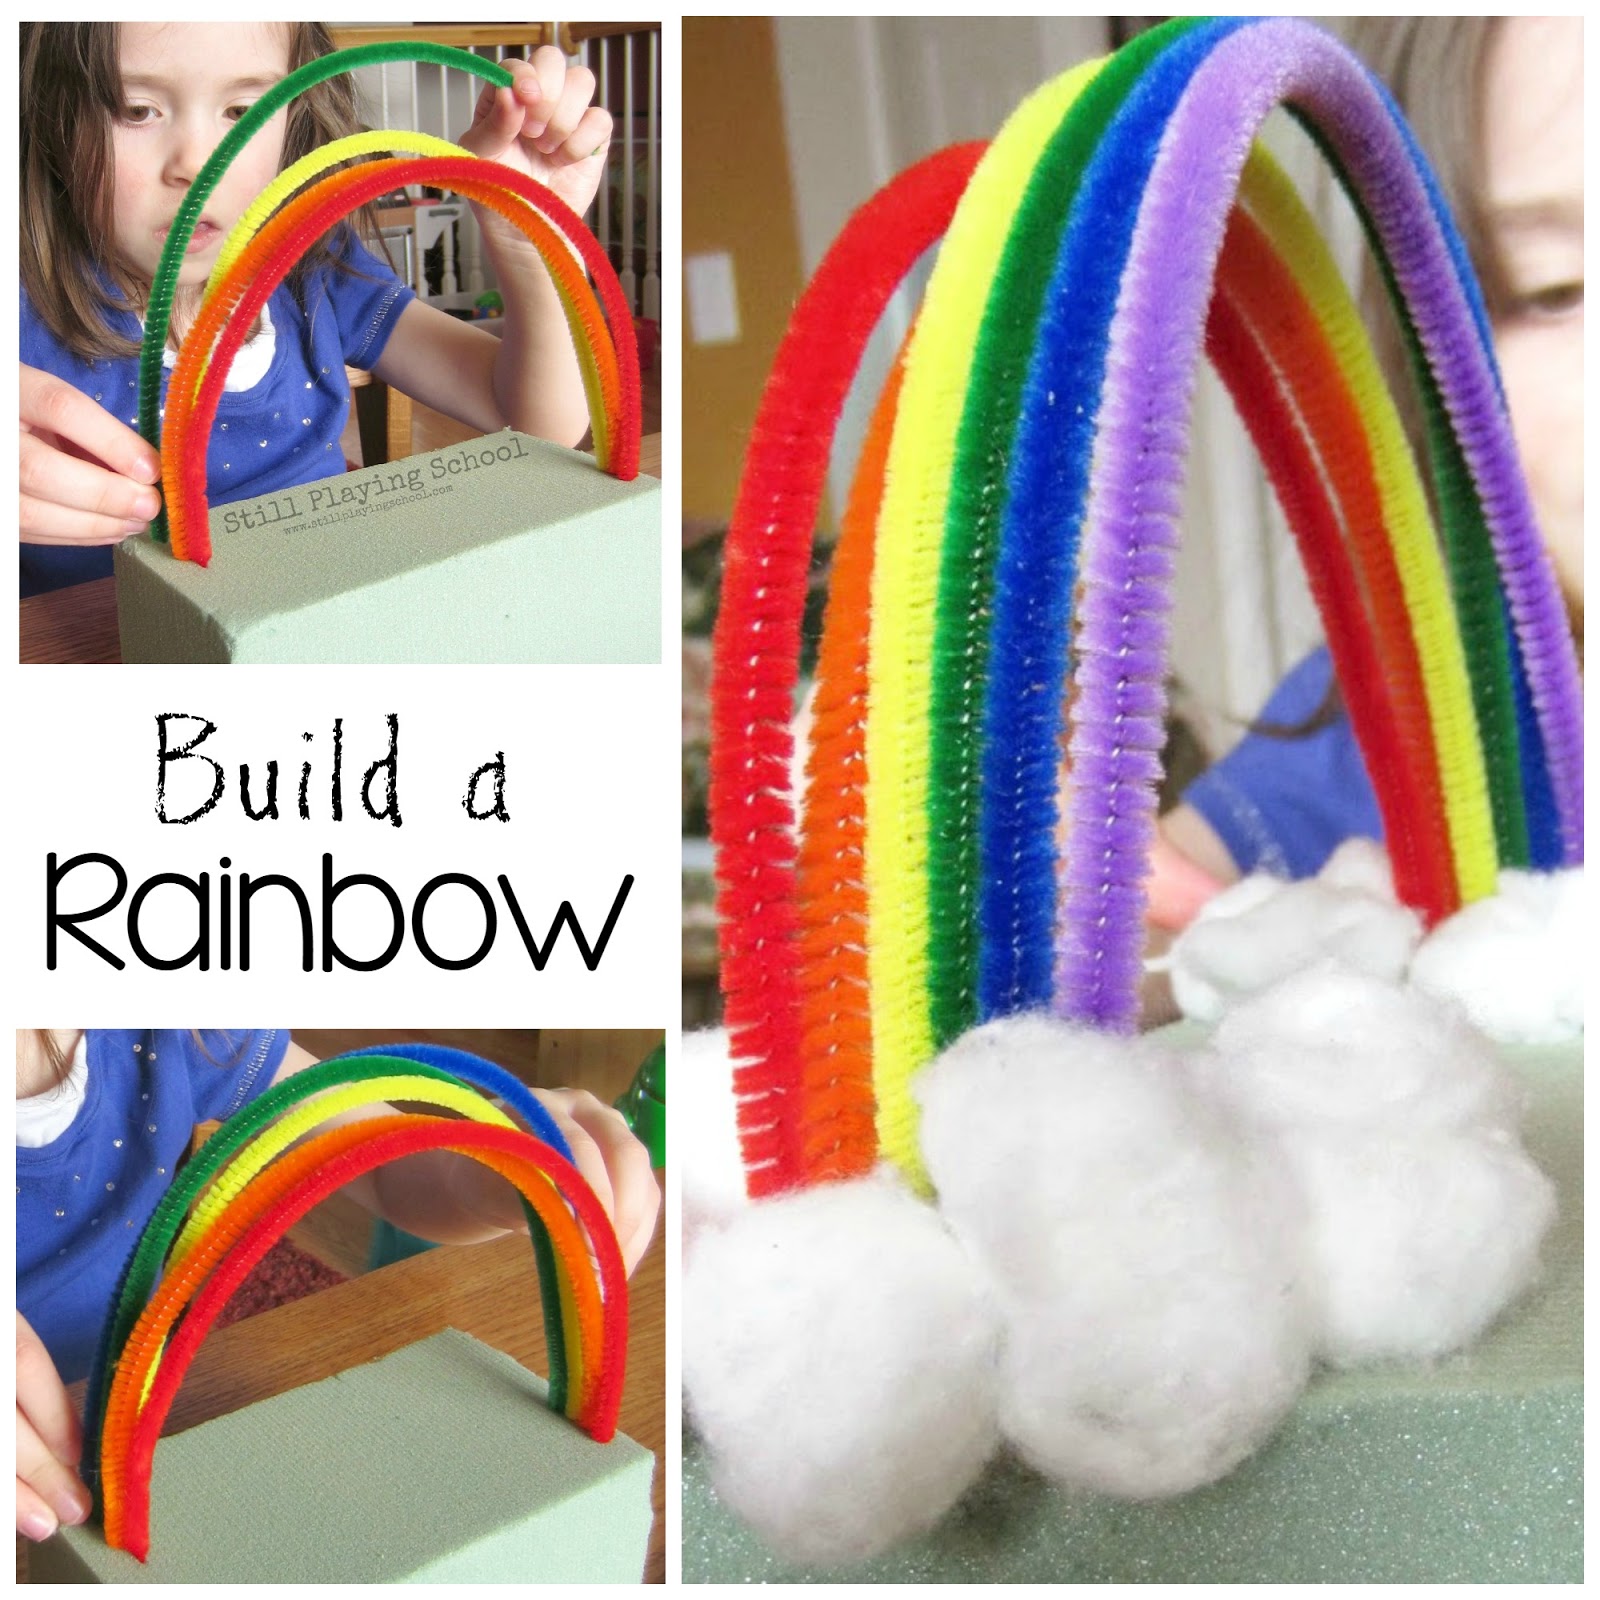 child building rainbow out of pipe cleaners